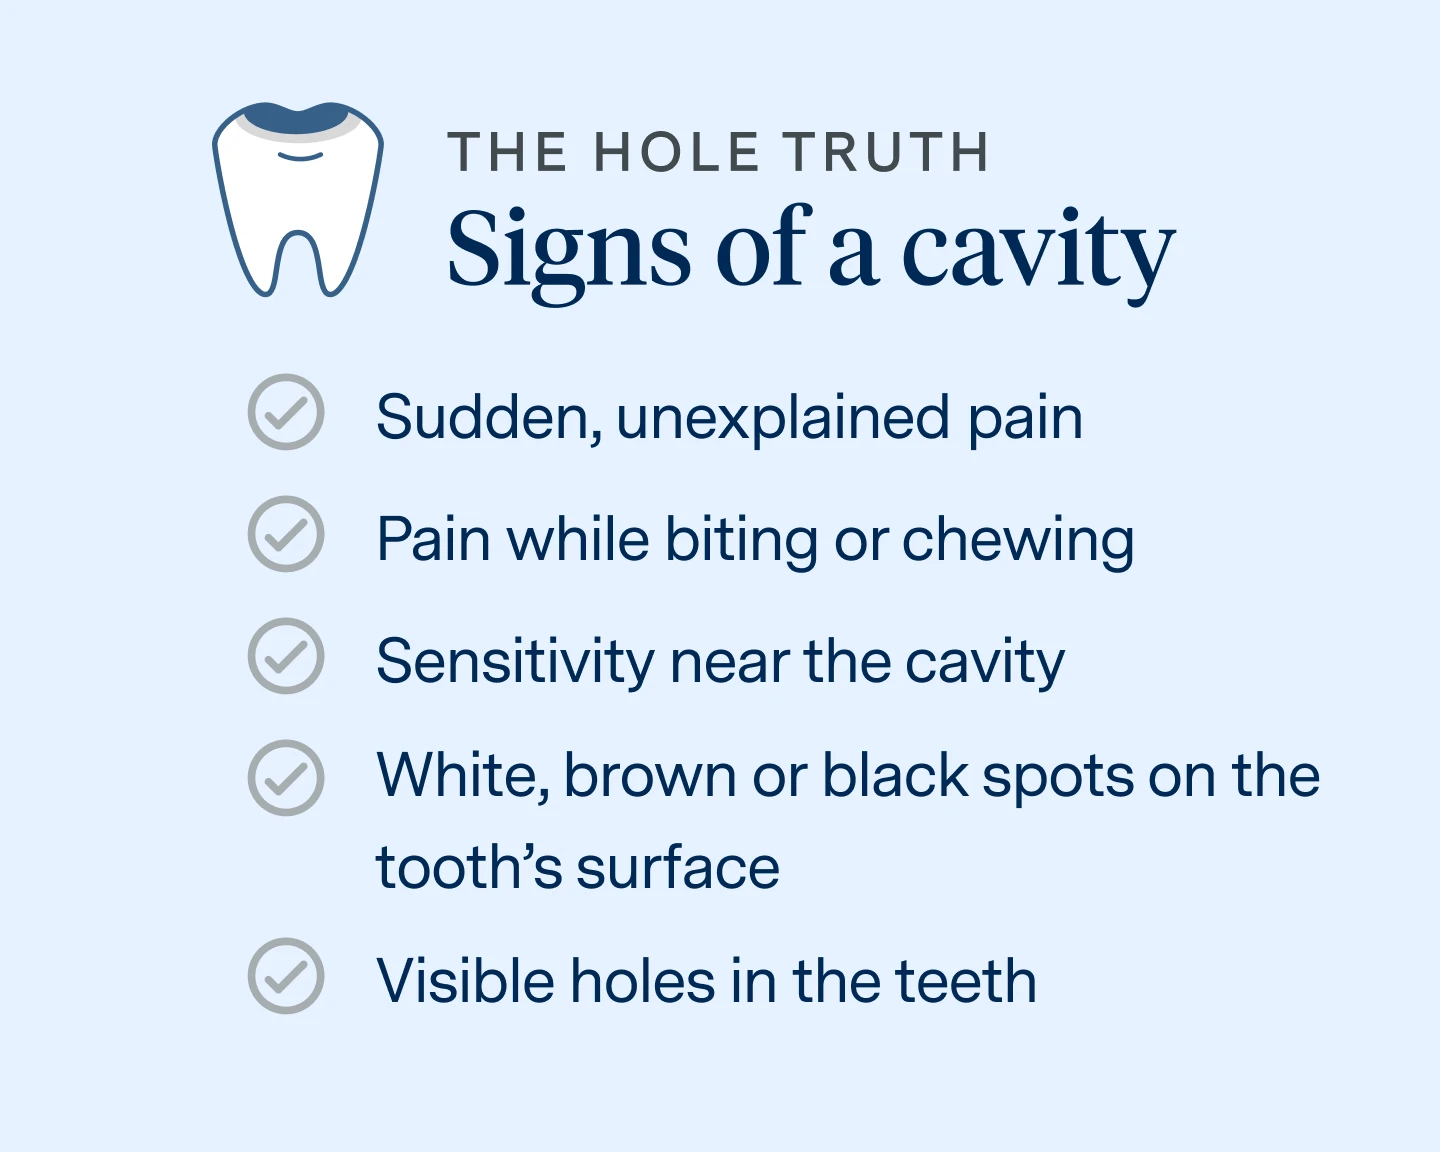 Signs of a cavity are: 
Sudden, unexplained pain
Pain while biting or chewing
Sensitivity near the cavity
White, brown or black spots on the tooth's surface
Visible holes in teeth